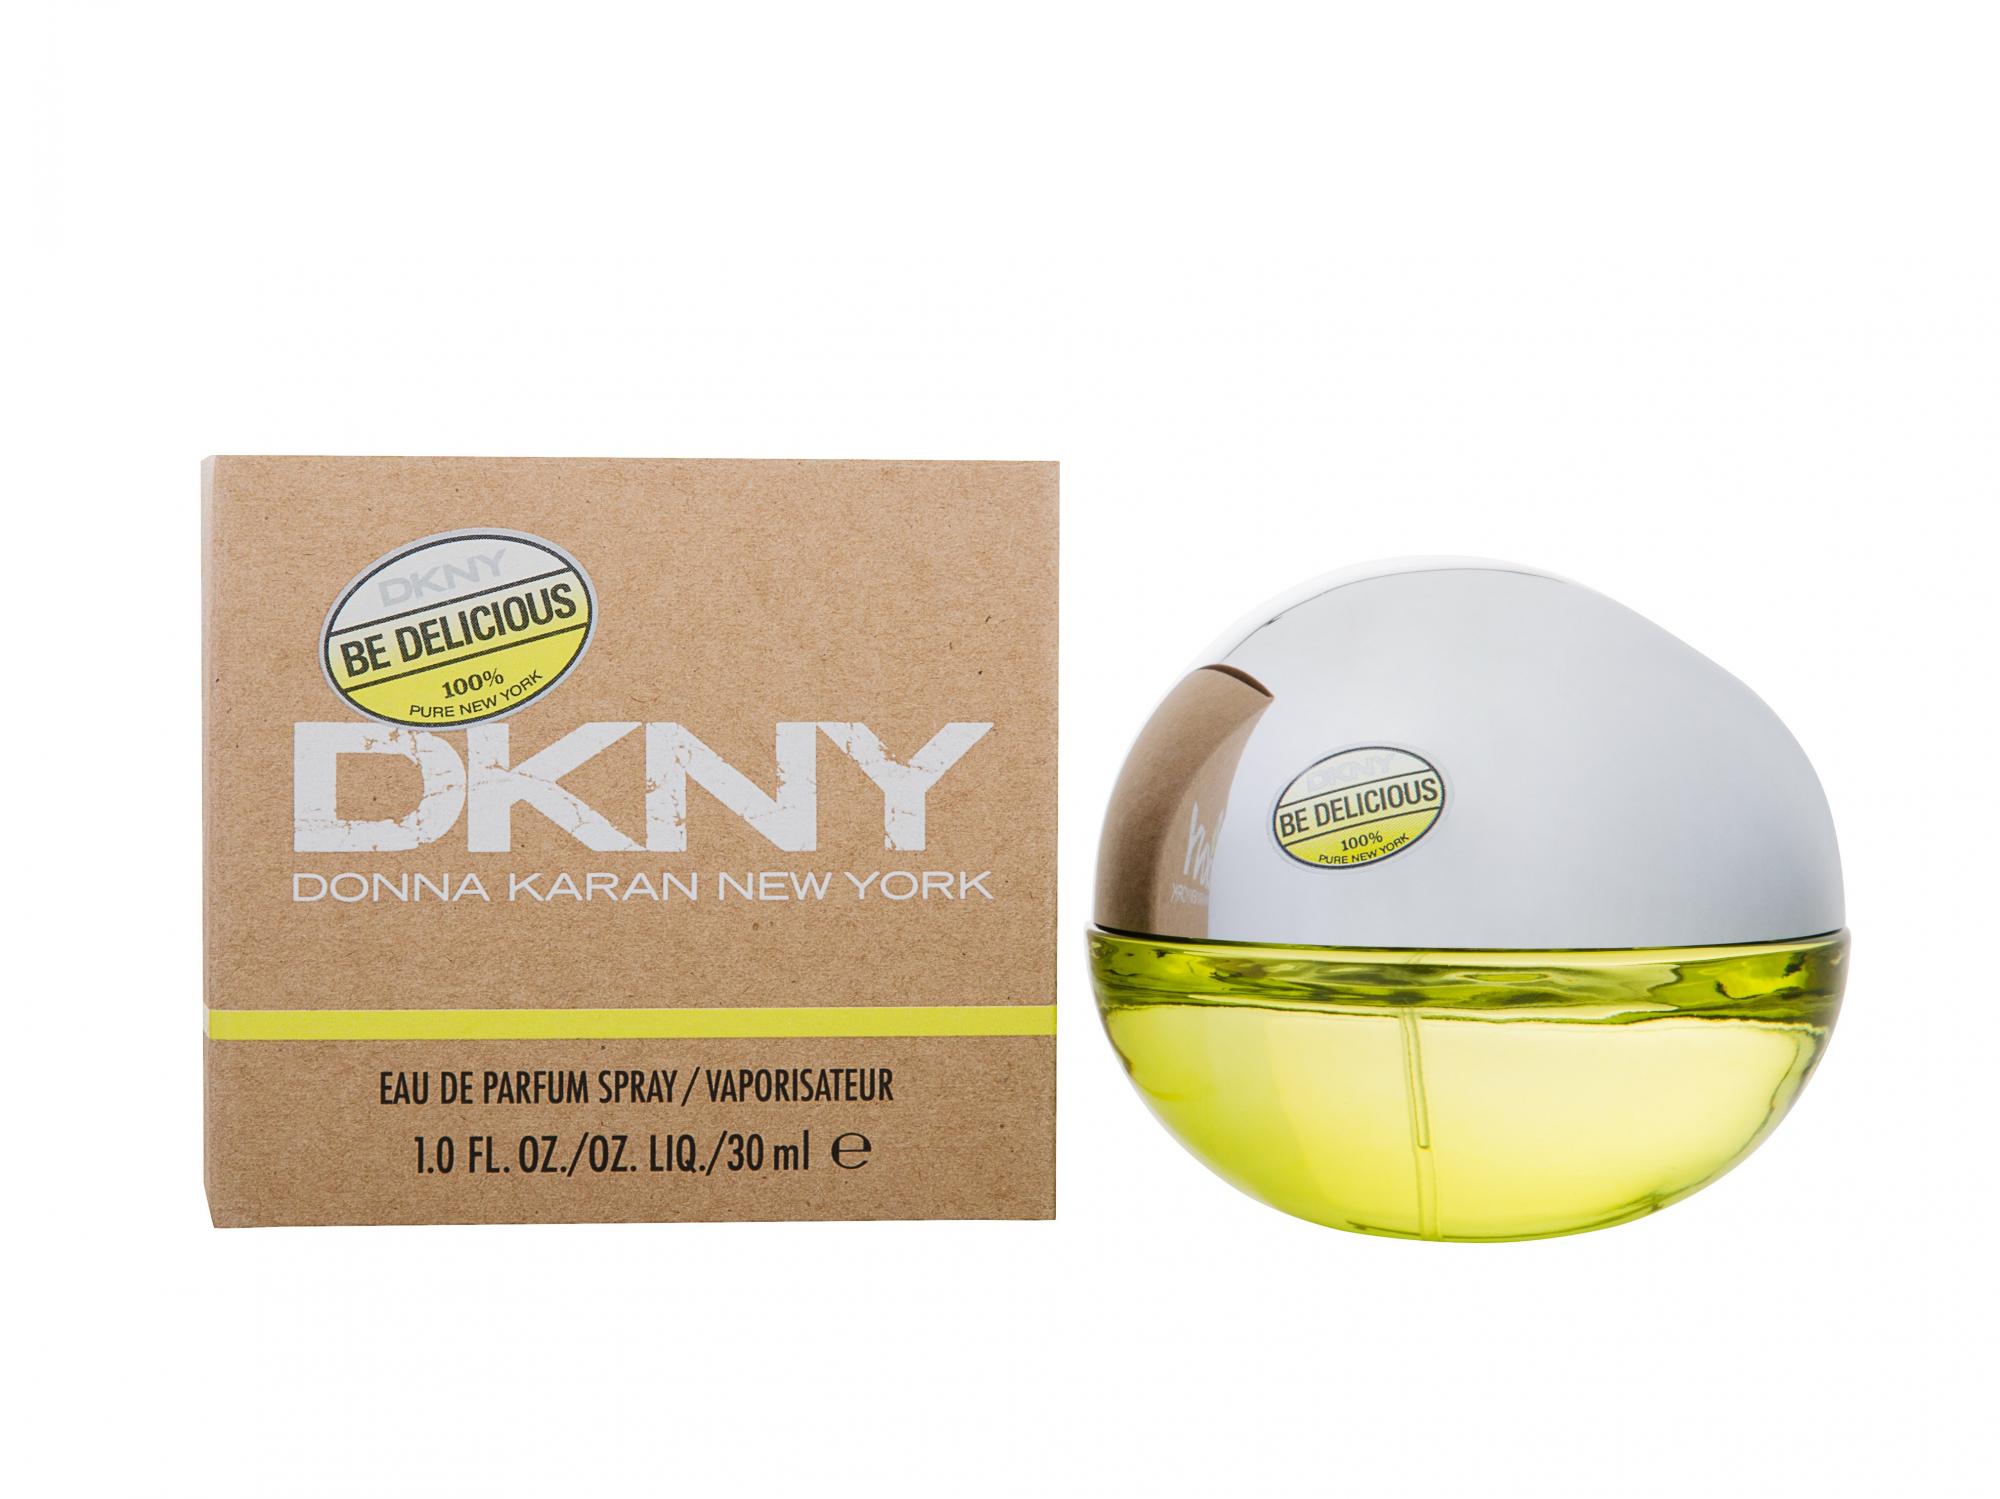 Dkny be delicious цены. DKNY be delicious 30 мл. DKNY be delicious EDP 30ml. Духи Донна Каран Нью-Йорк би Делишес. Донна Каран Нью-Йорк зеленое яблоко 100 мл.